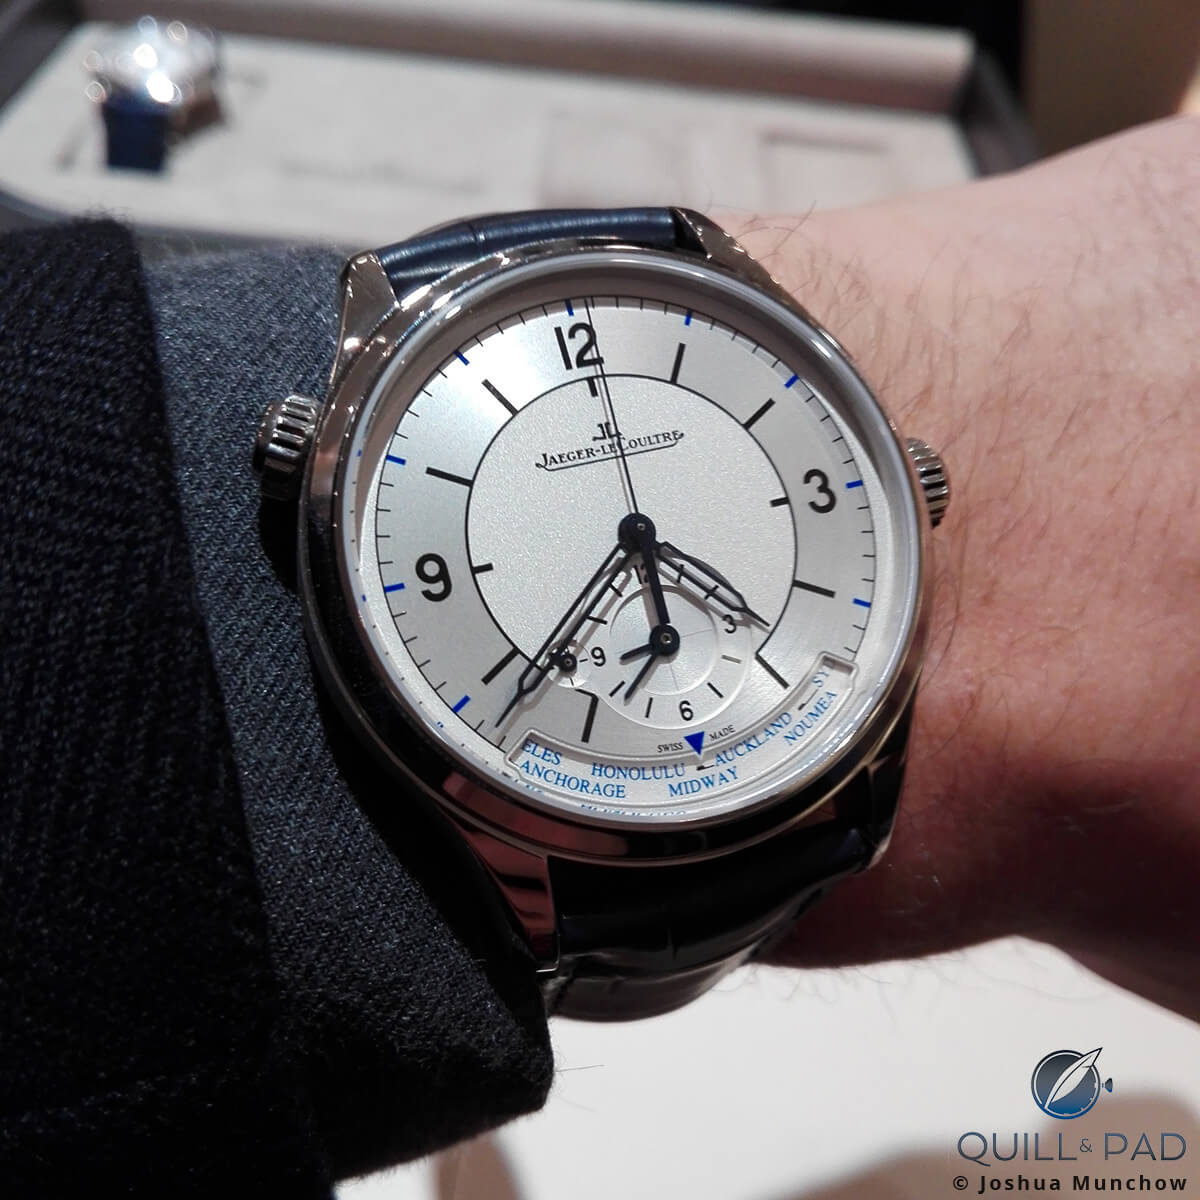 Jaeger-LeCoultre Master Control Geographic on the wrist